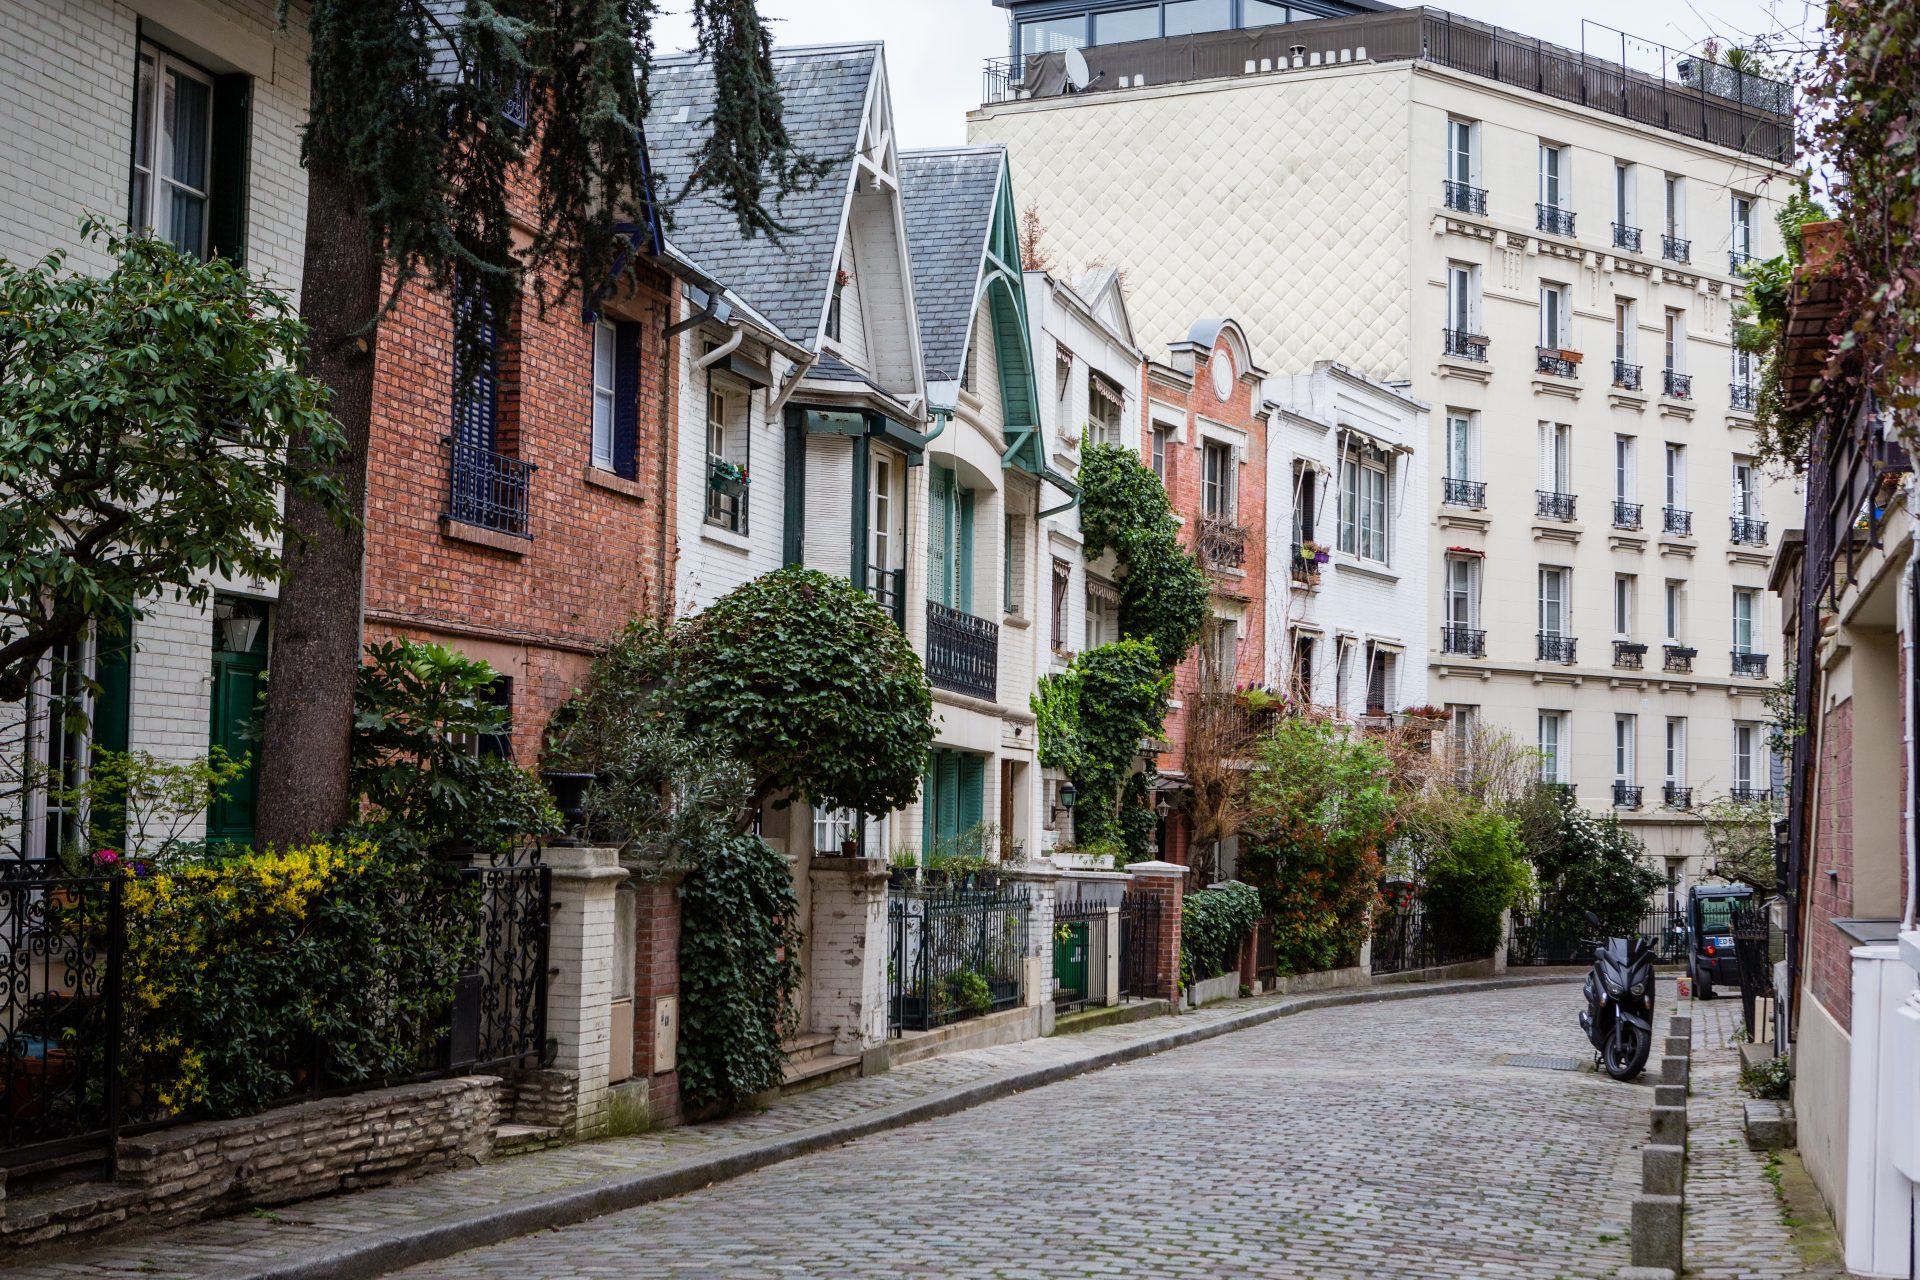 <p>While wandering through Montmartre, make sure to stroll down this lesser-known street, brimming with charm with its colorful houses and flower-filled gardens. It's the perfect spot to escape the city's hustle and bustle (and sneak a romantic moment).</p>